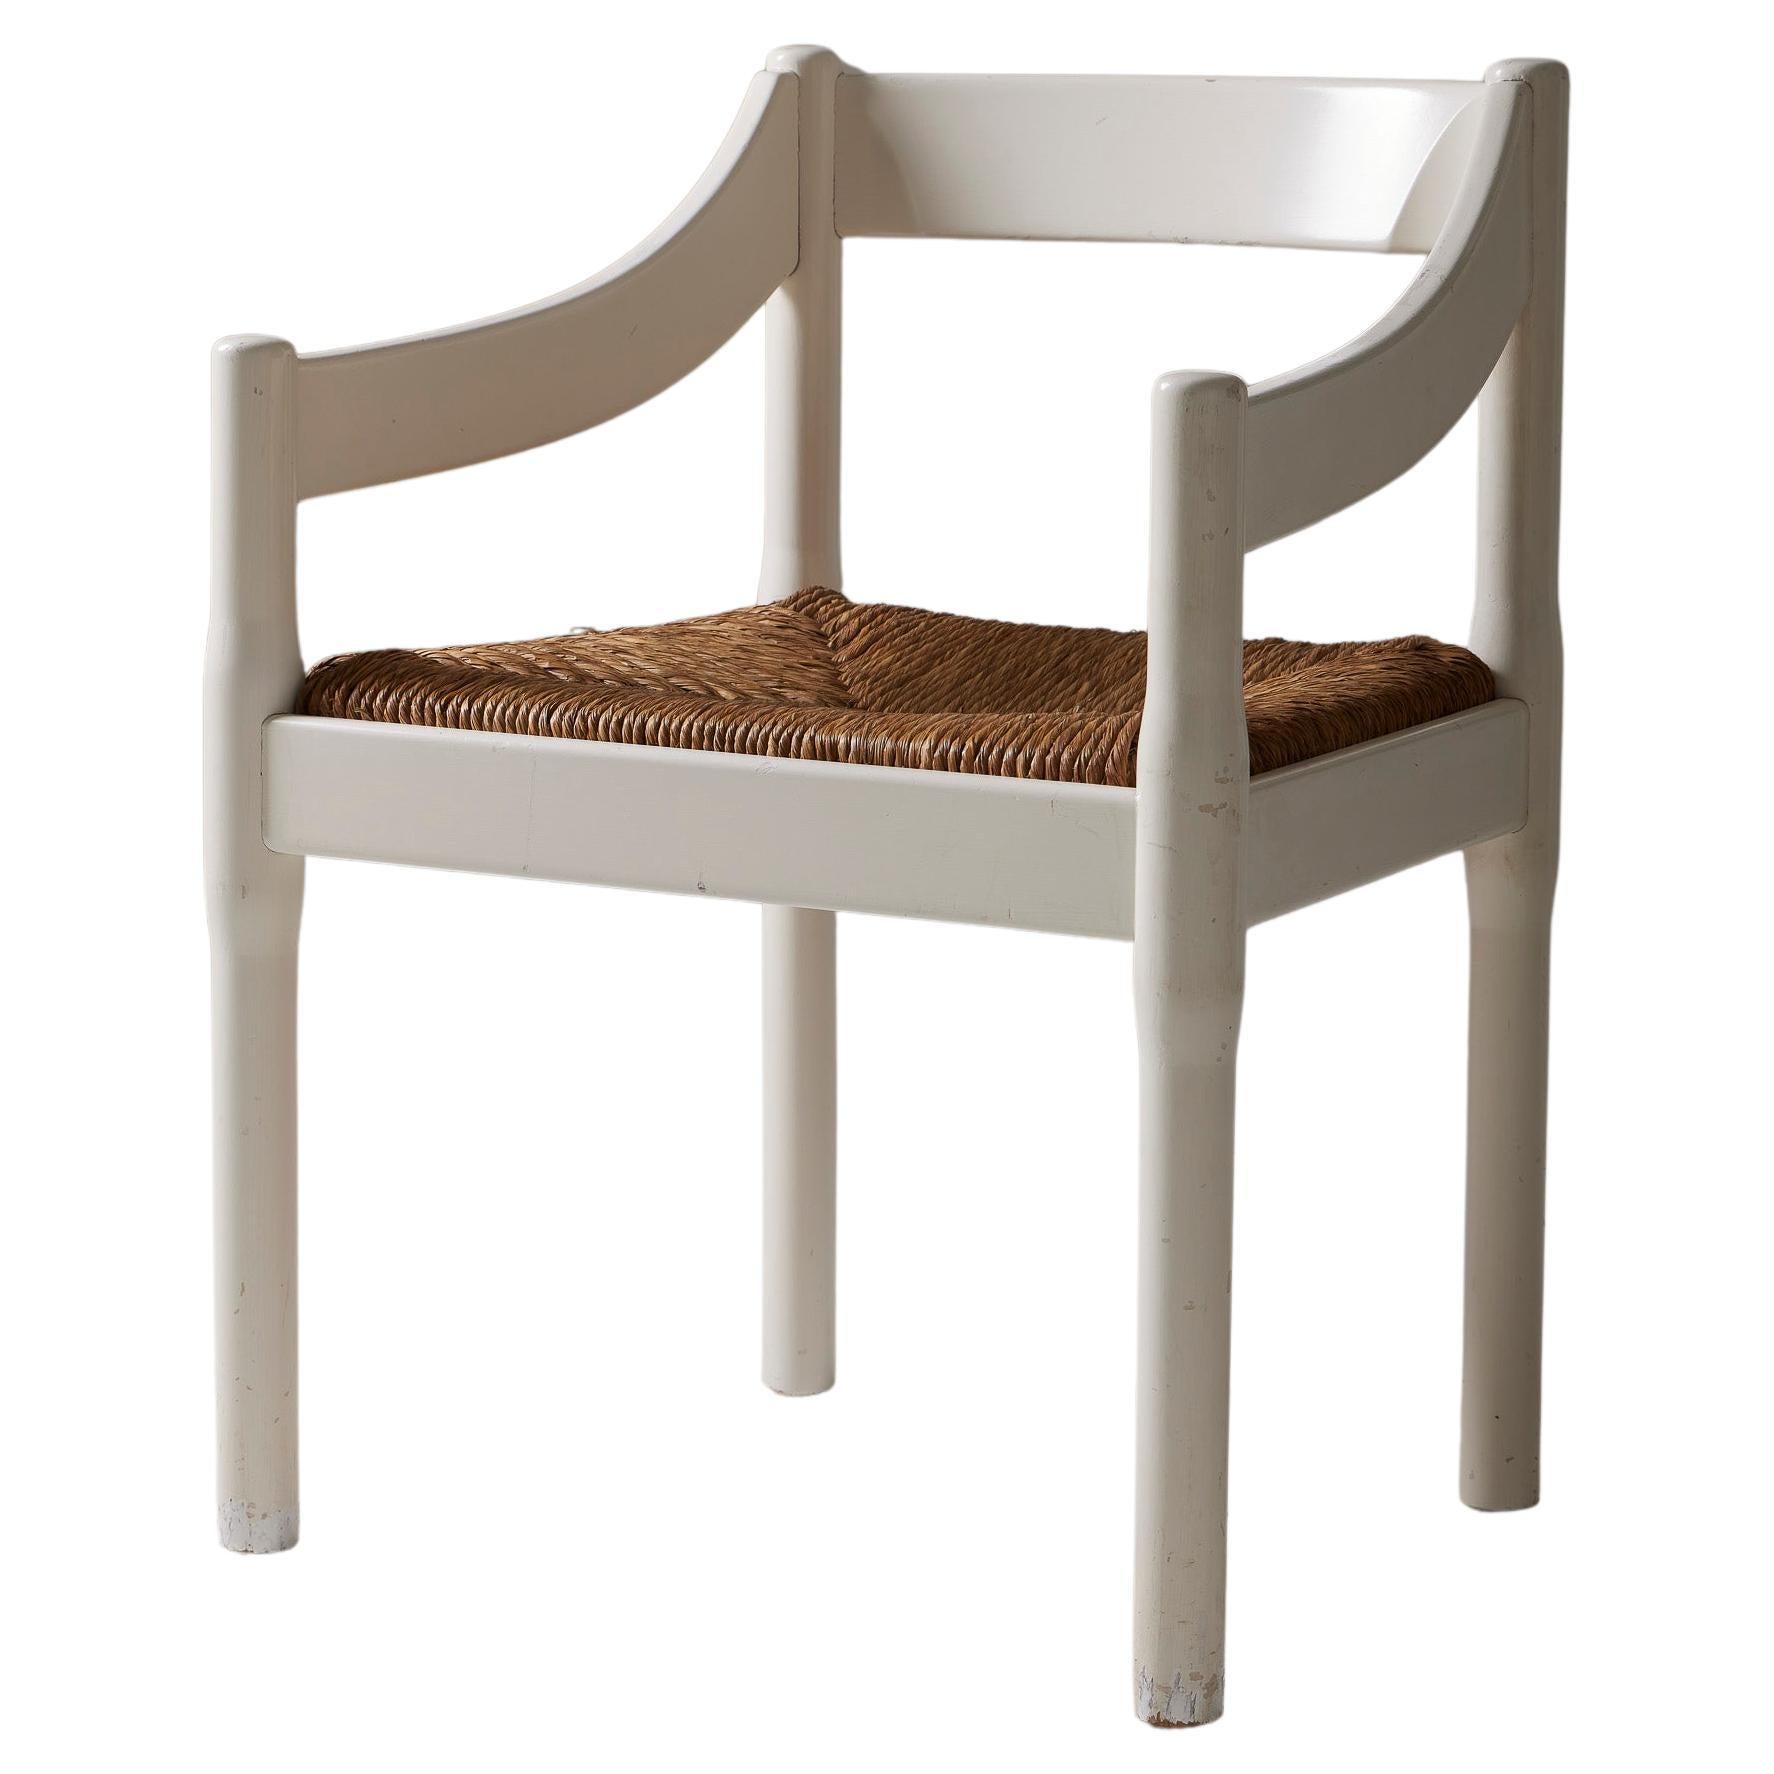  Wood and straw chair by Vico Magistretti For Sale